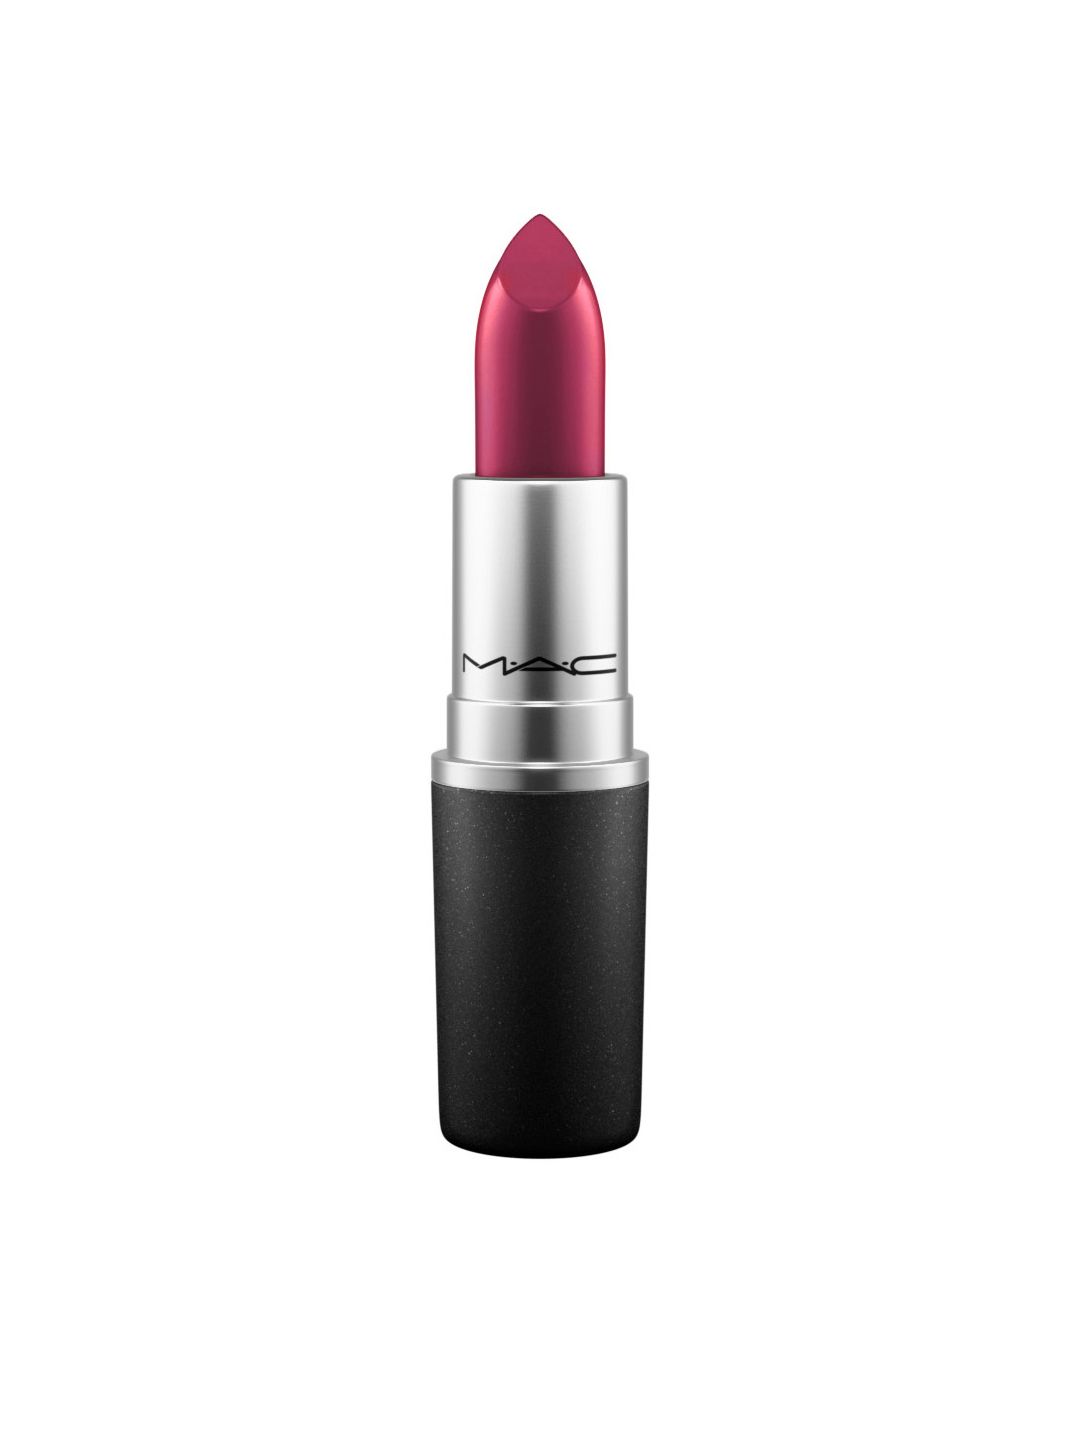 M.A.C Cremesheen Lipstick - Party Line 3 g Price in India